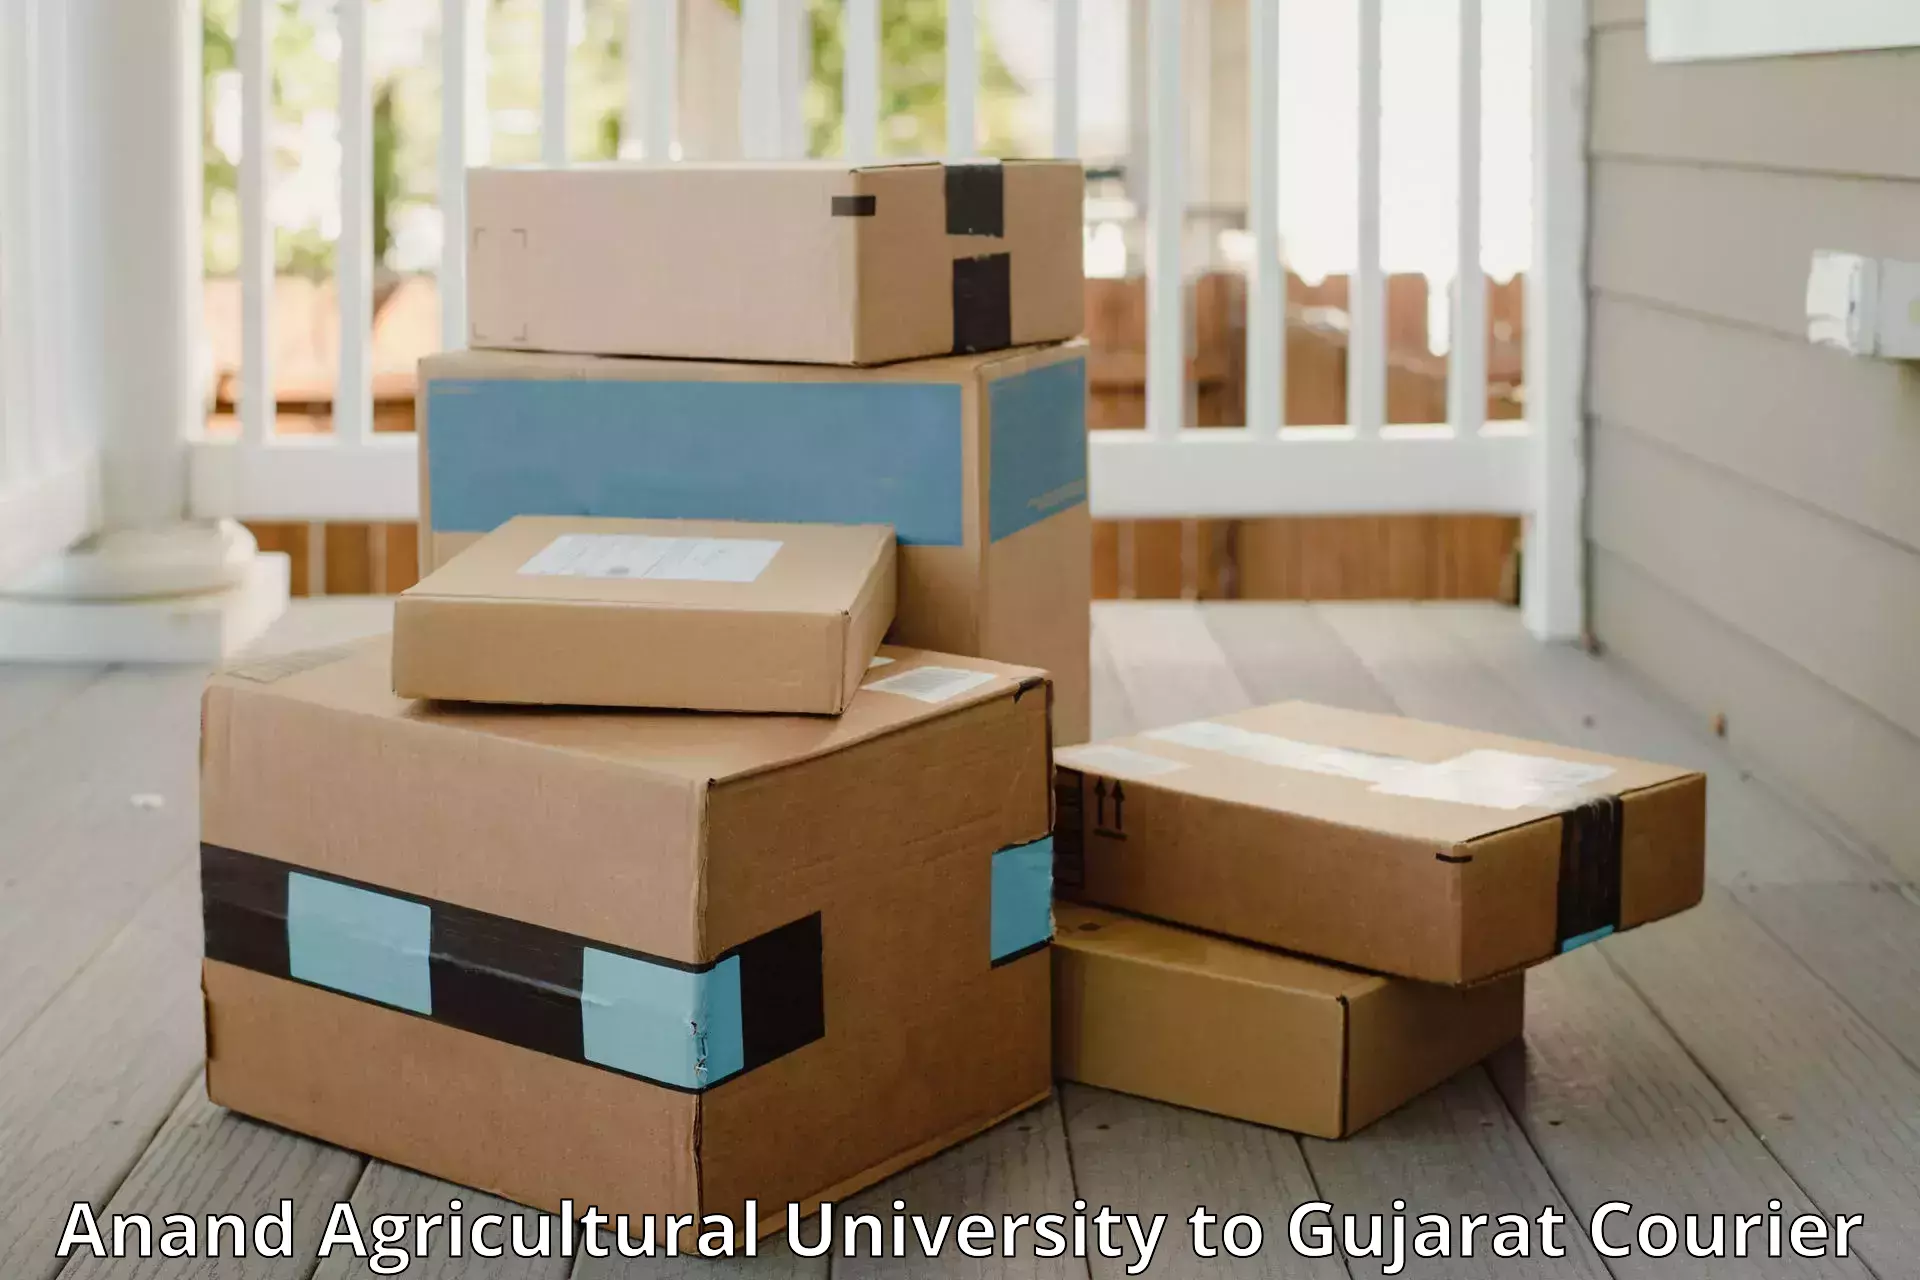 Same day luggage service Anand Agricultural University to Nasvadi